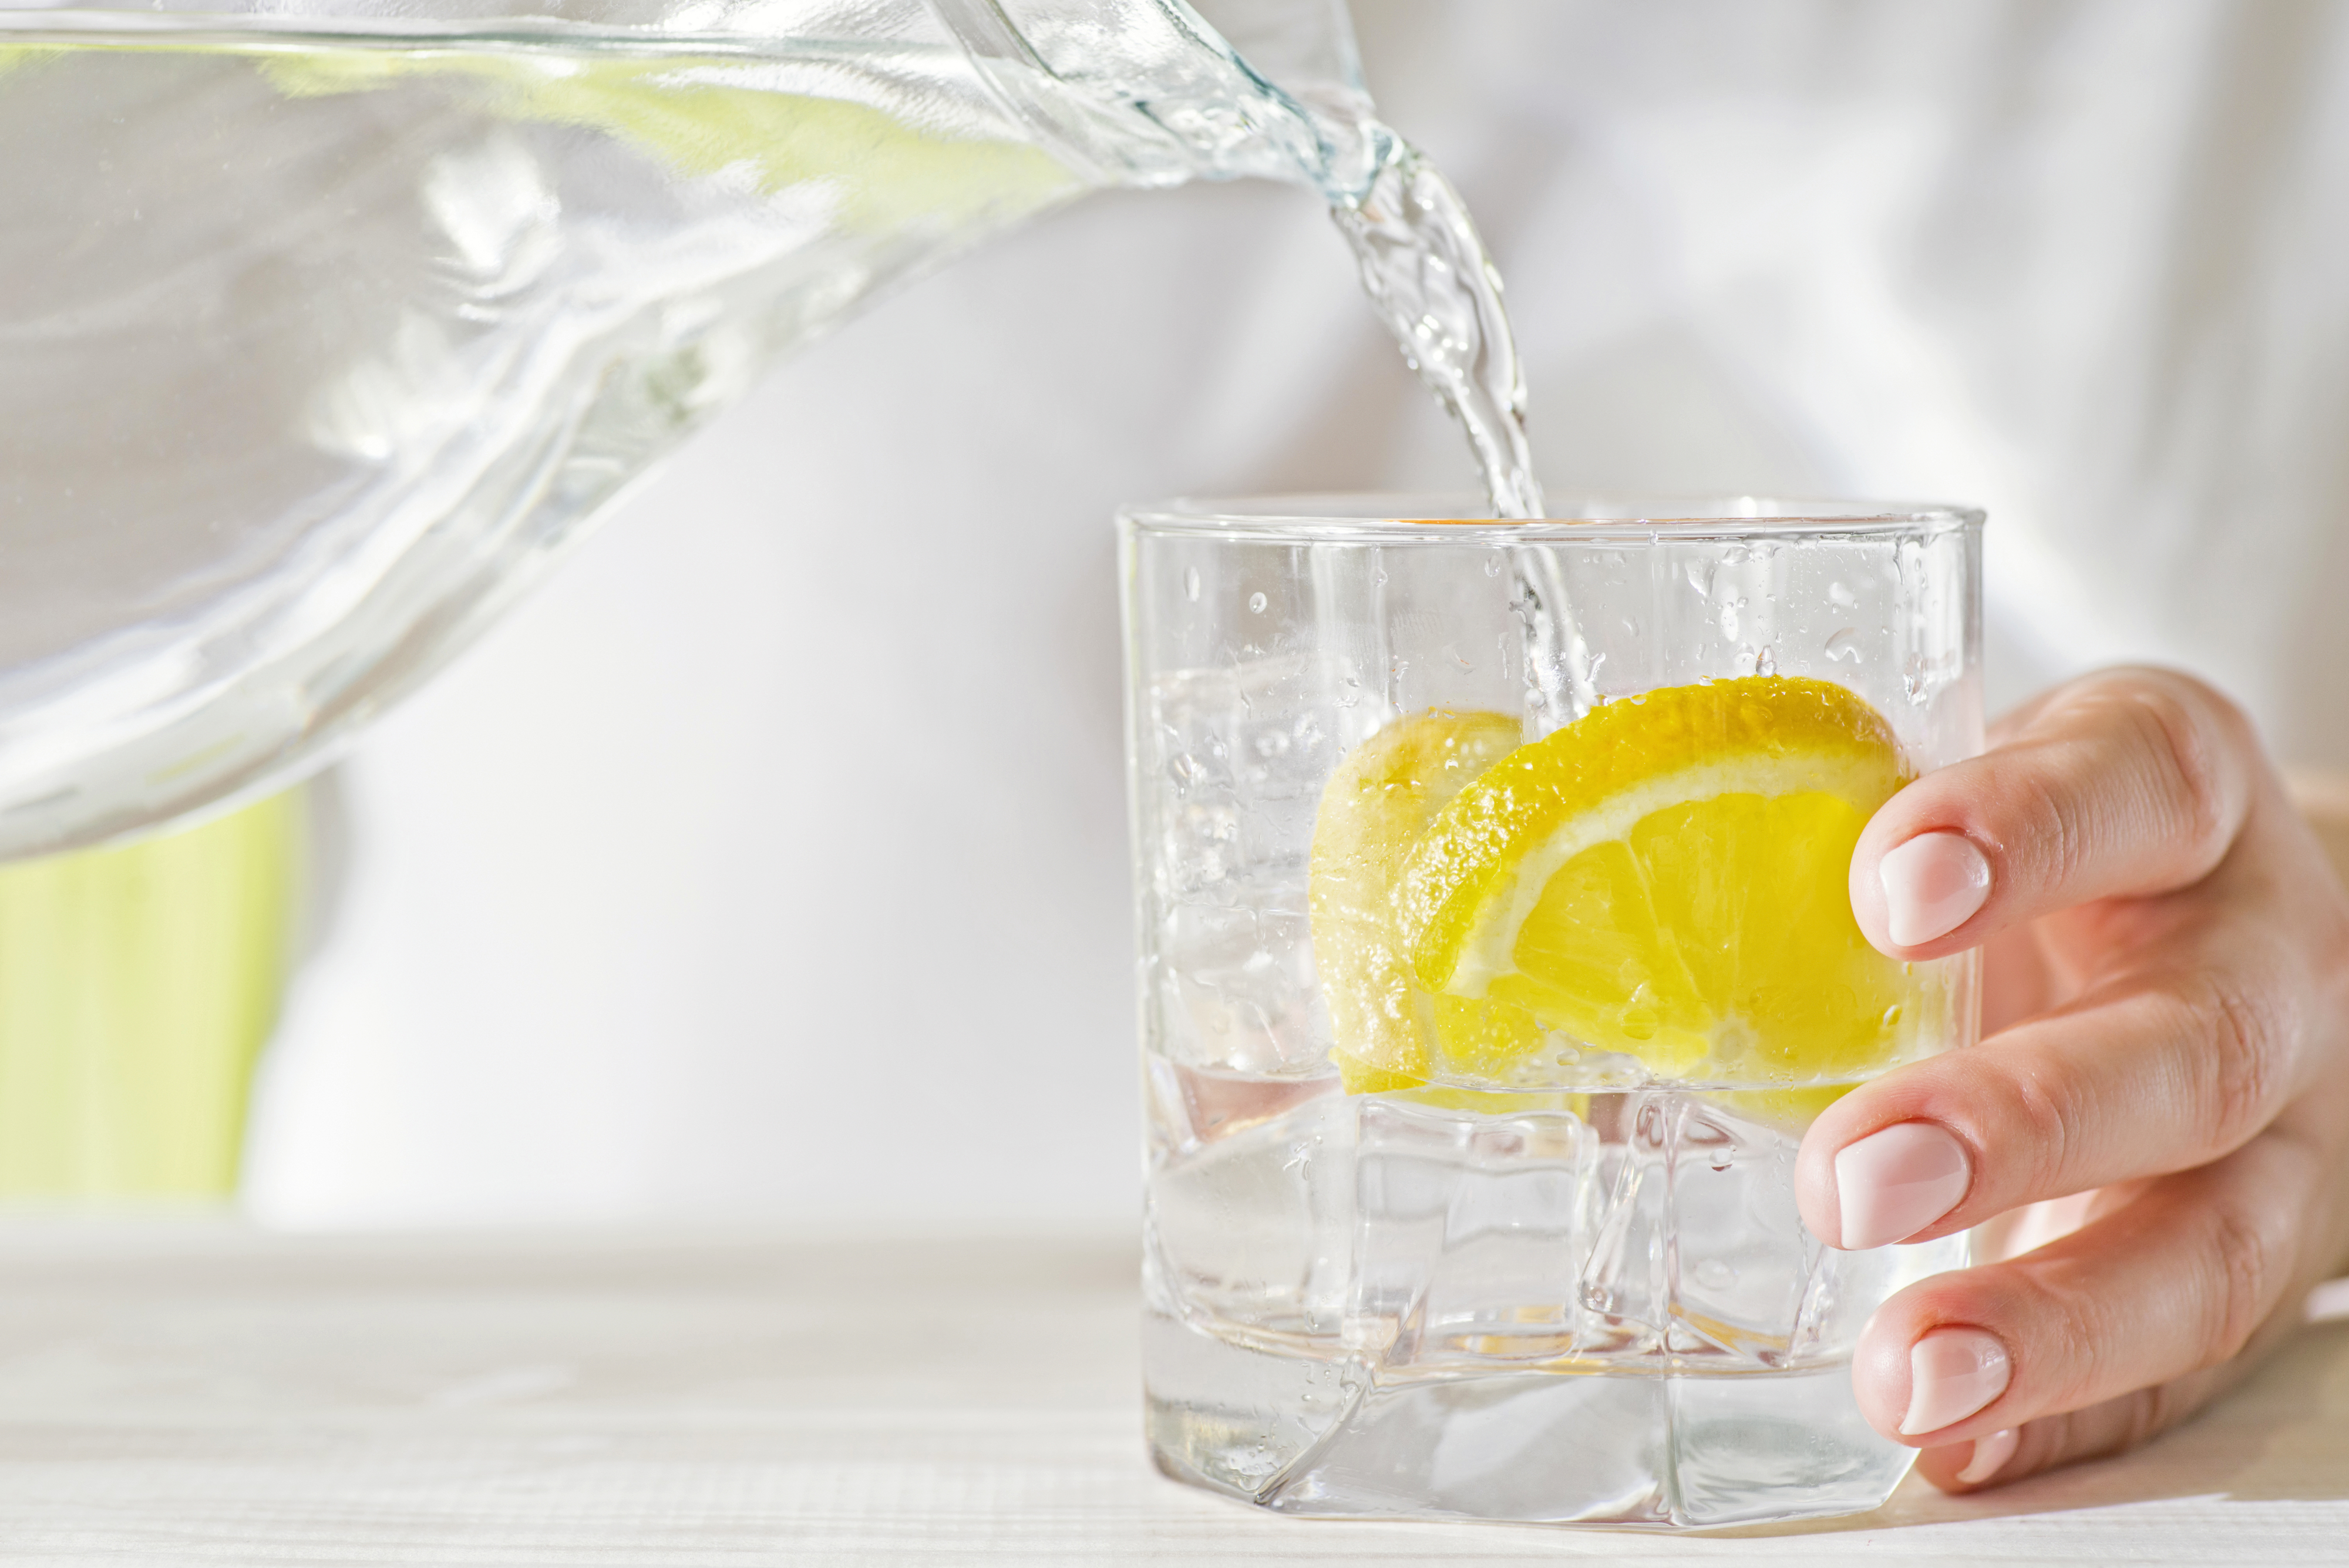 A hand pours water from a pitcher into a glass containing lemon slices